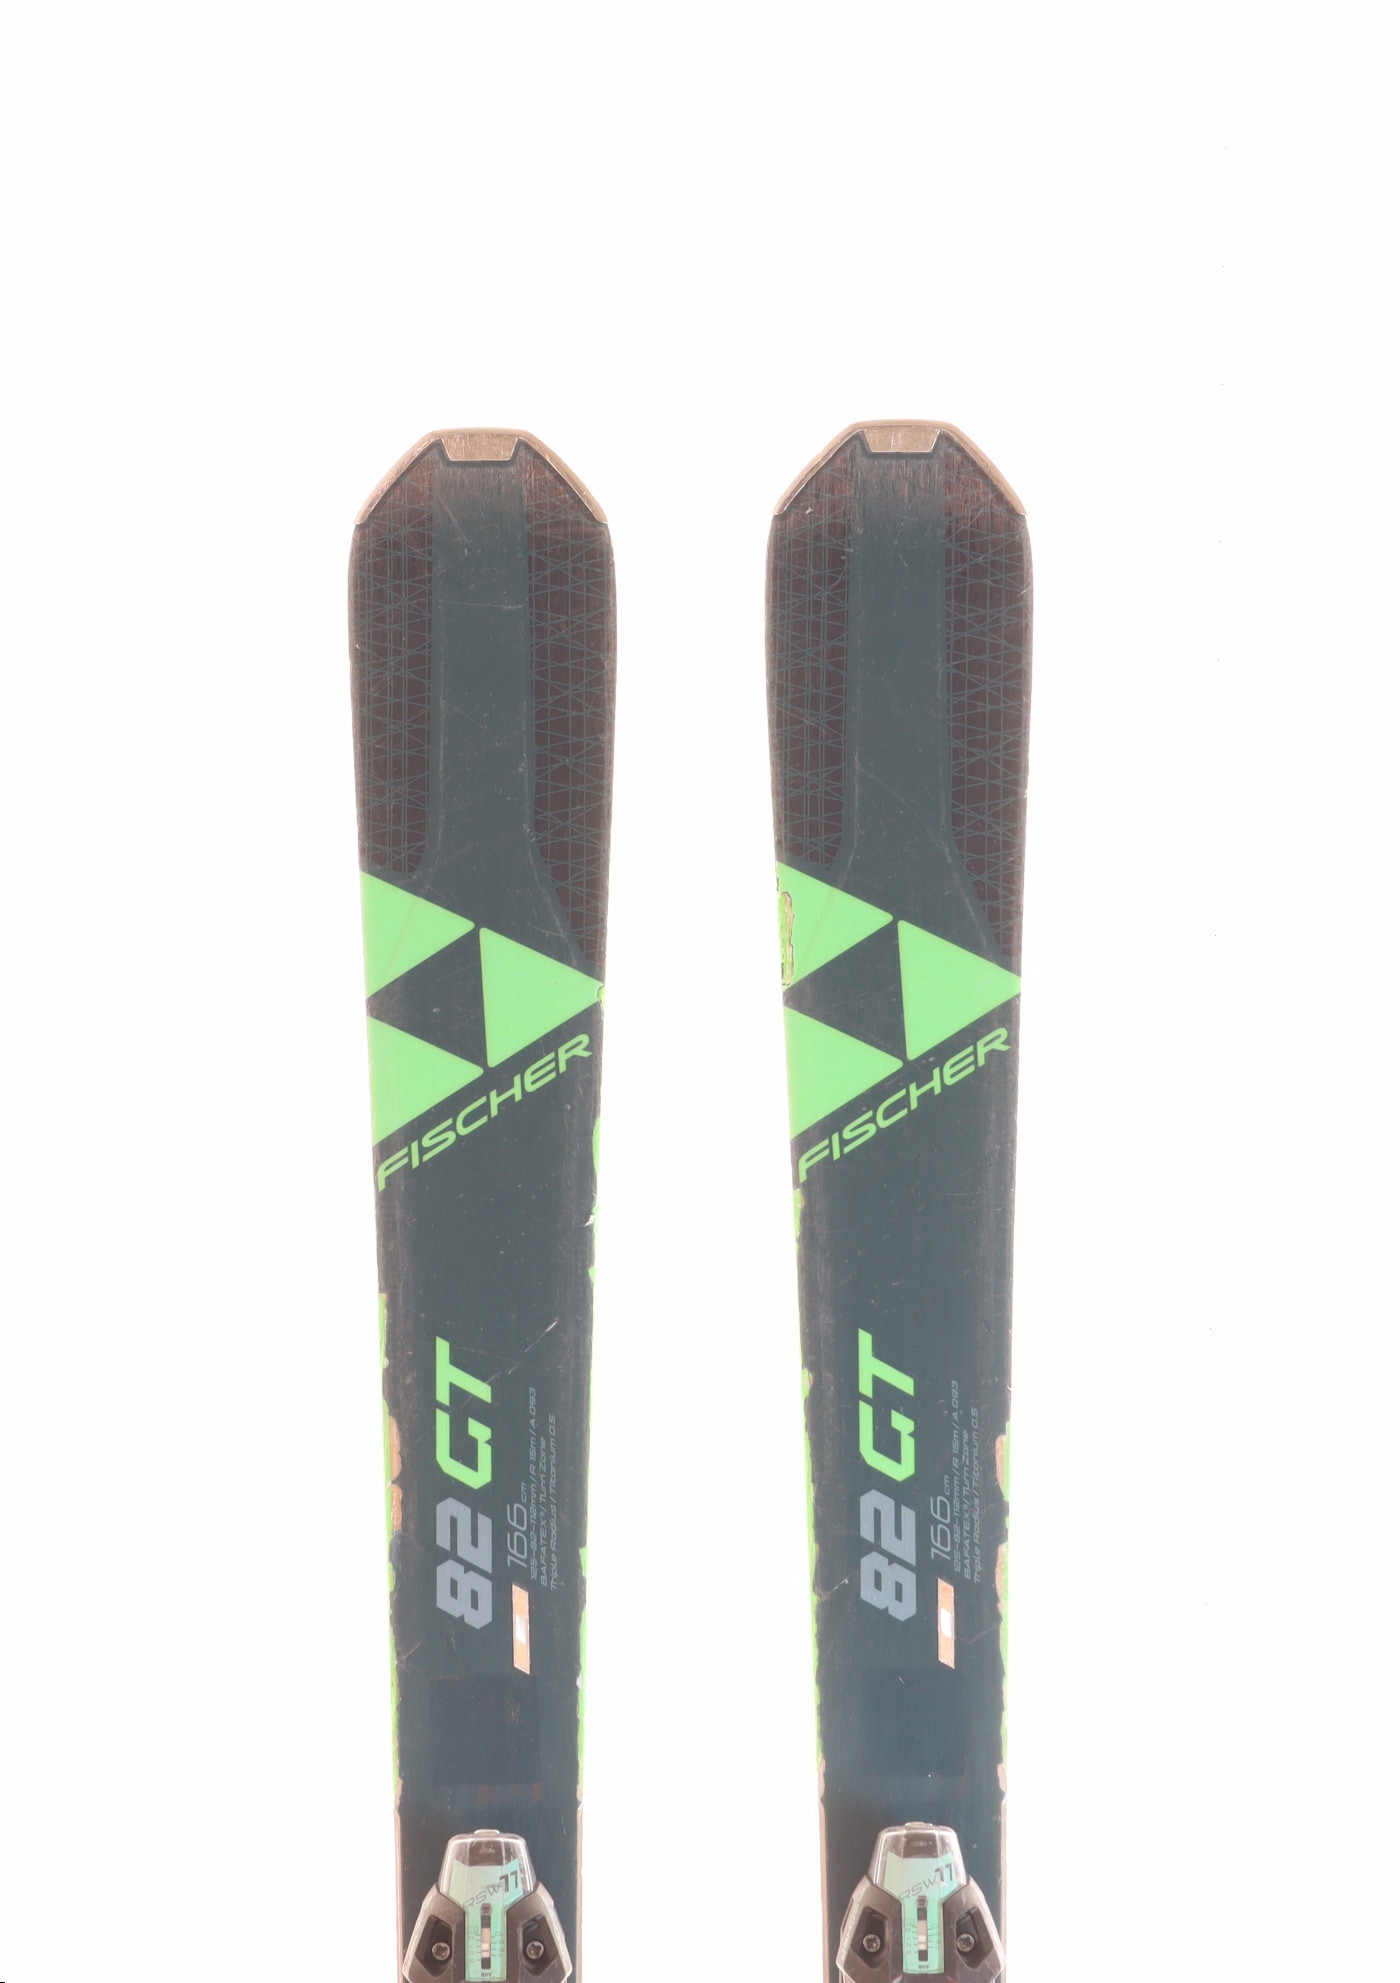 Used 2021 Fischer RC One 82 GT Skis with Marker TCX 11 Bindings Size 166 (Option 230914)